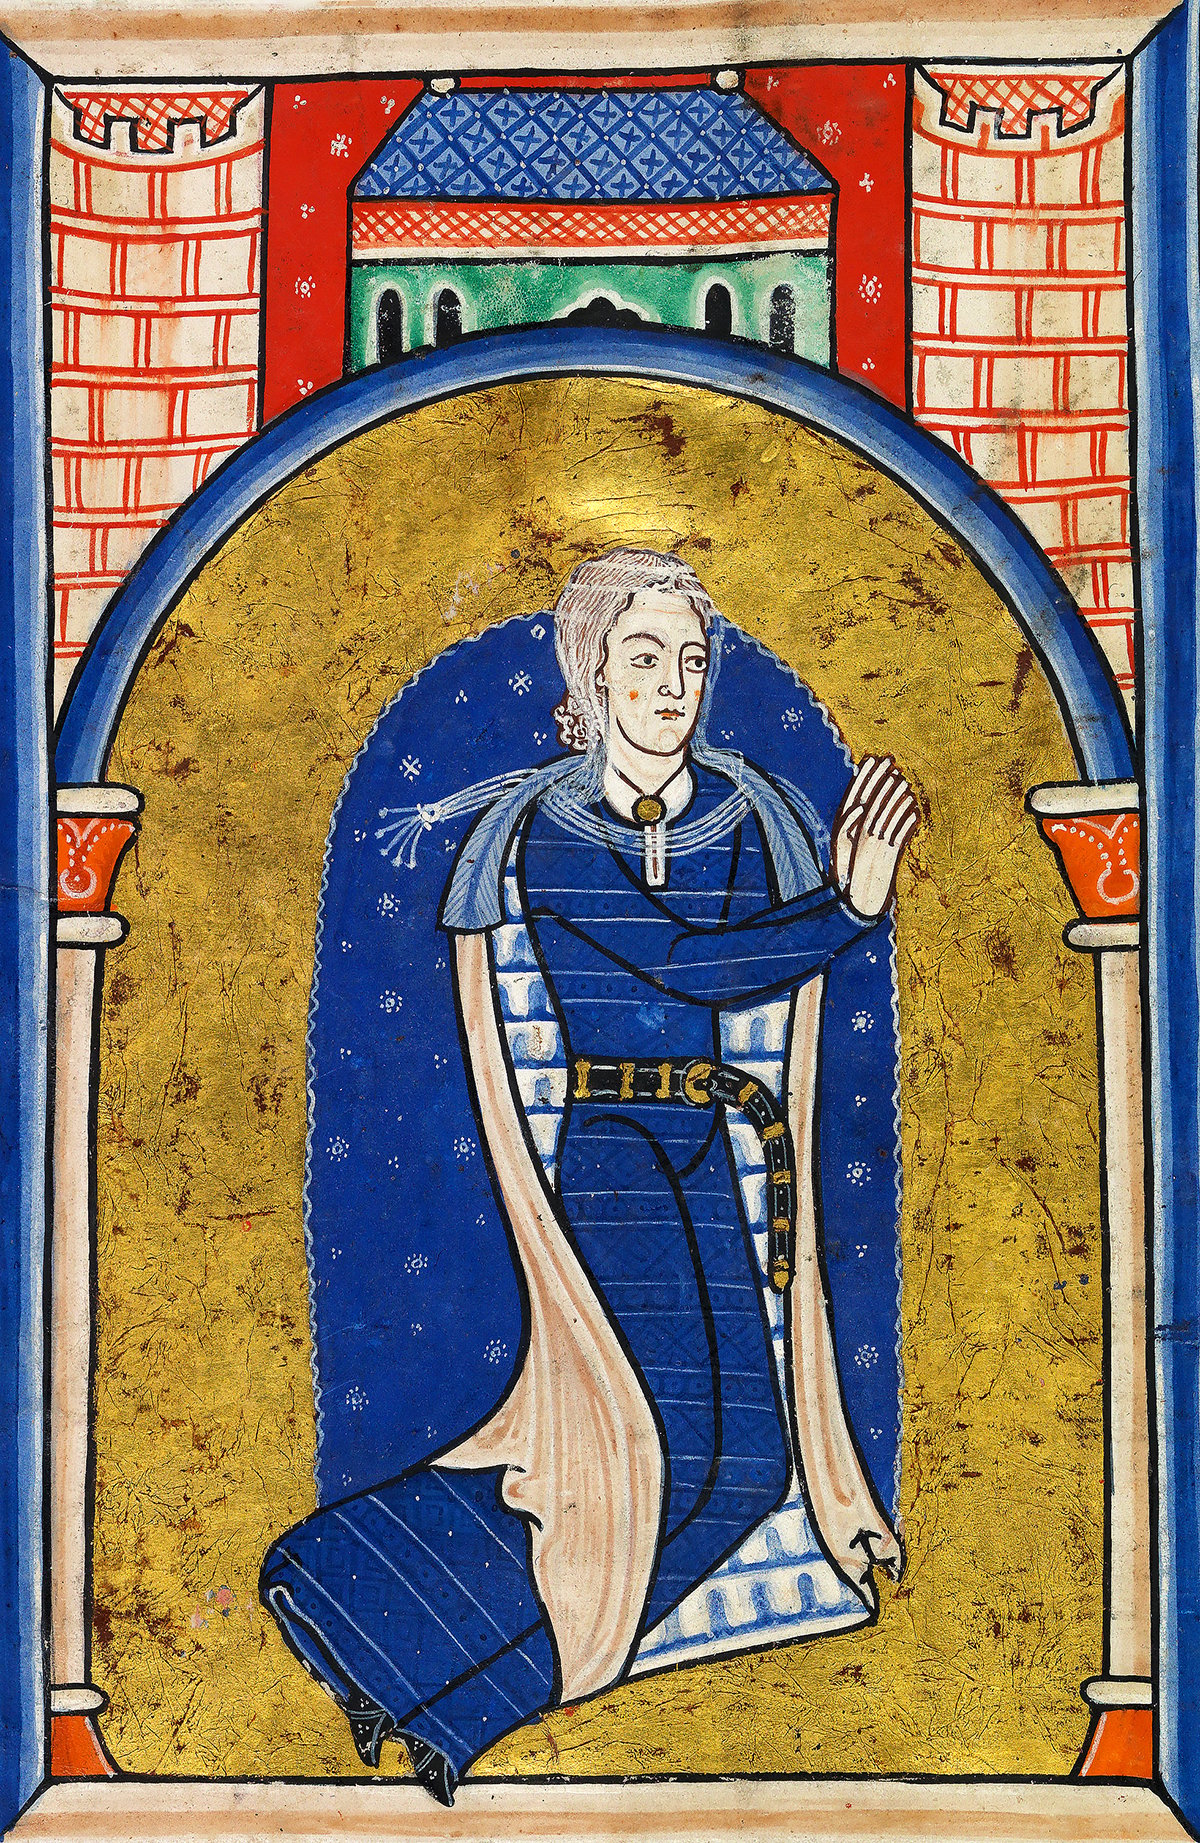 A medieval manuscript illustration of Eleanor of Aquitaine, the queen of France and England in the 12th century. She is depicted in a blue robe, praying on her knees. The background is gold with a blue and red patterned border.